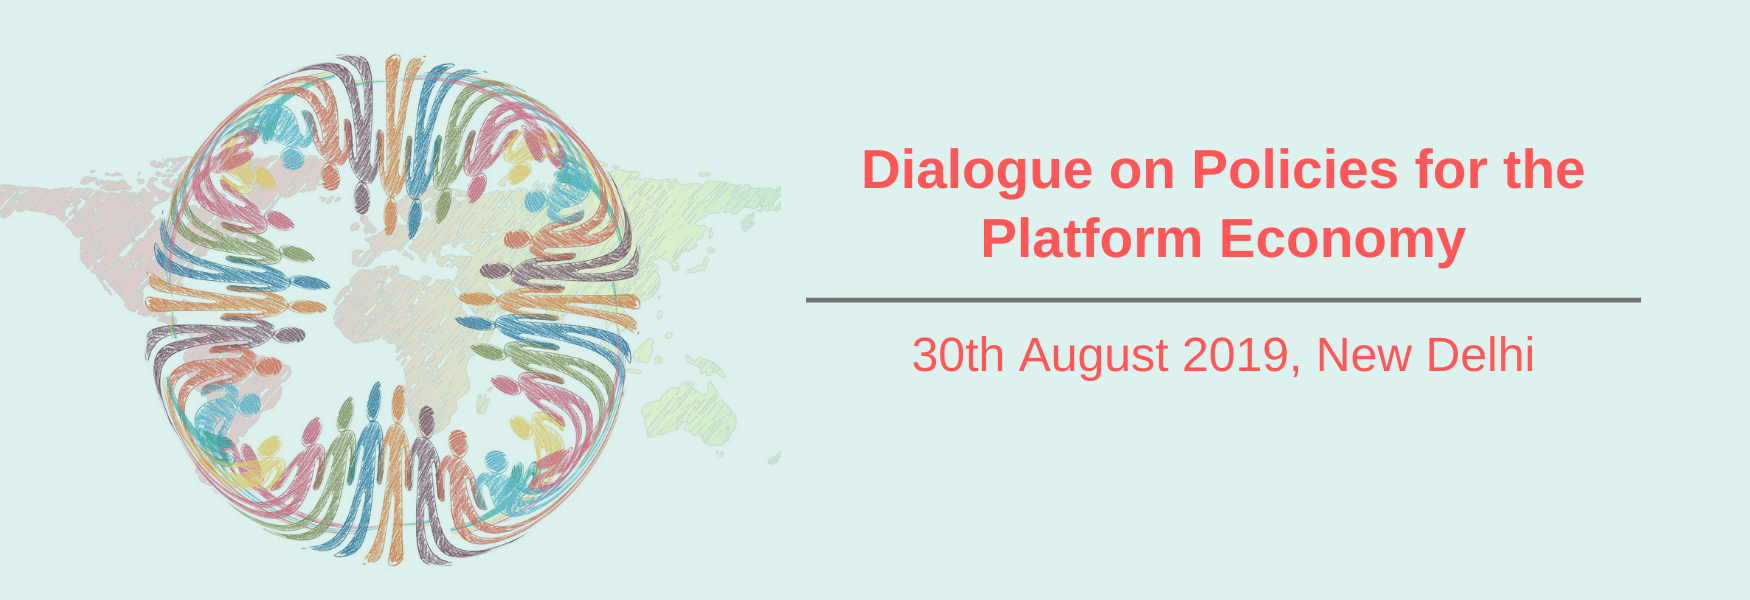 Dialogue on Policies for the Platform Economy